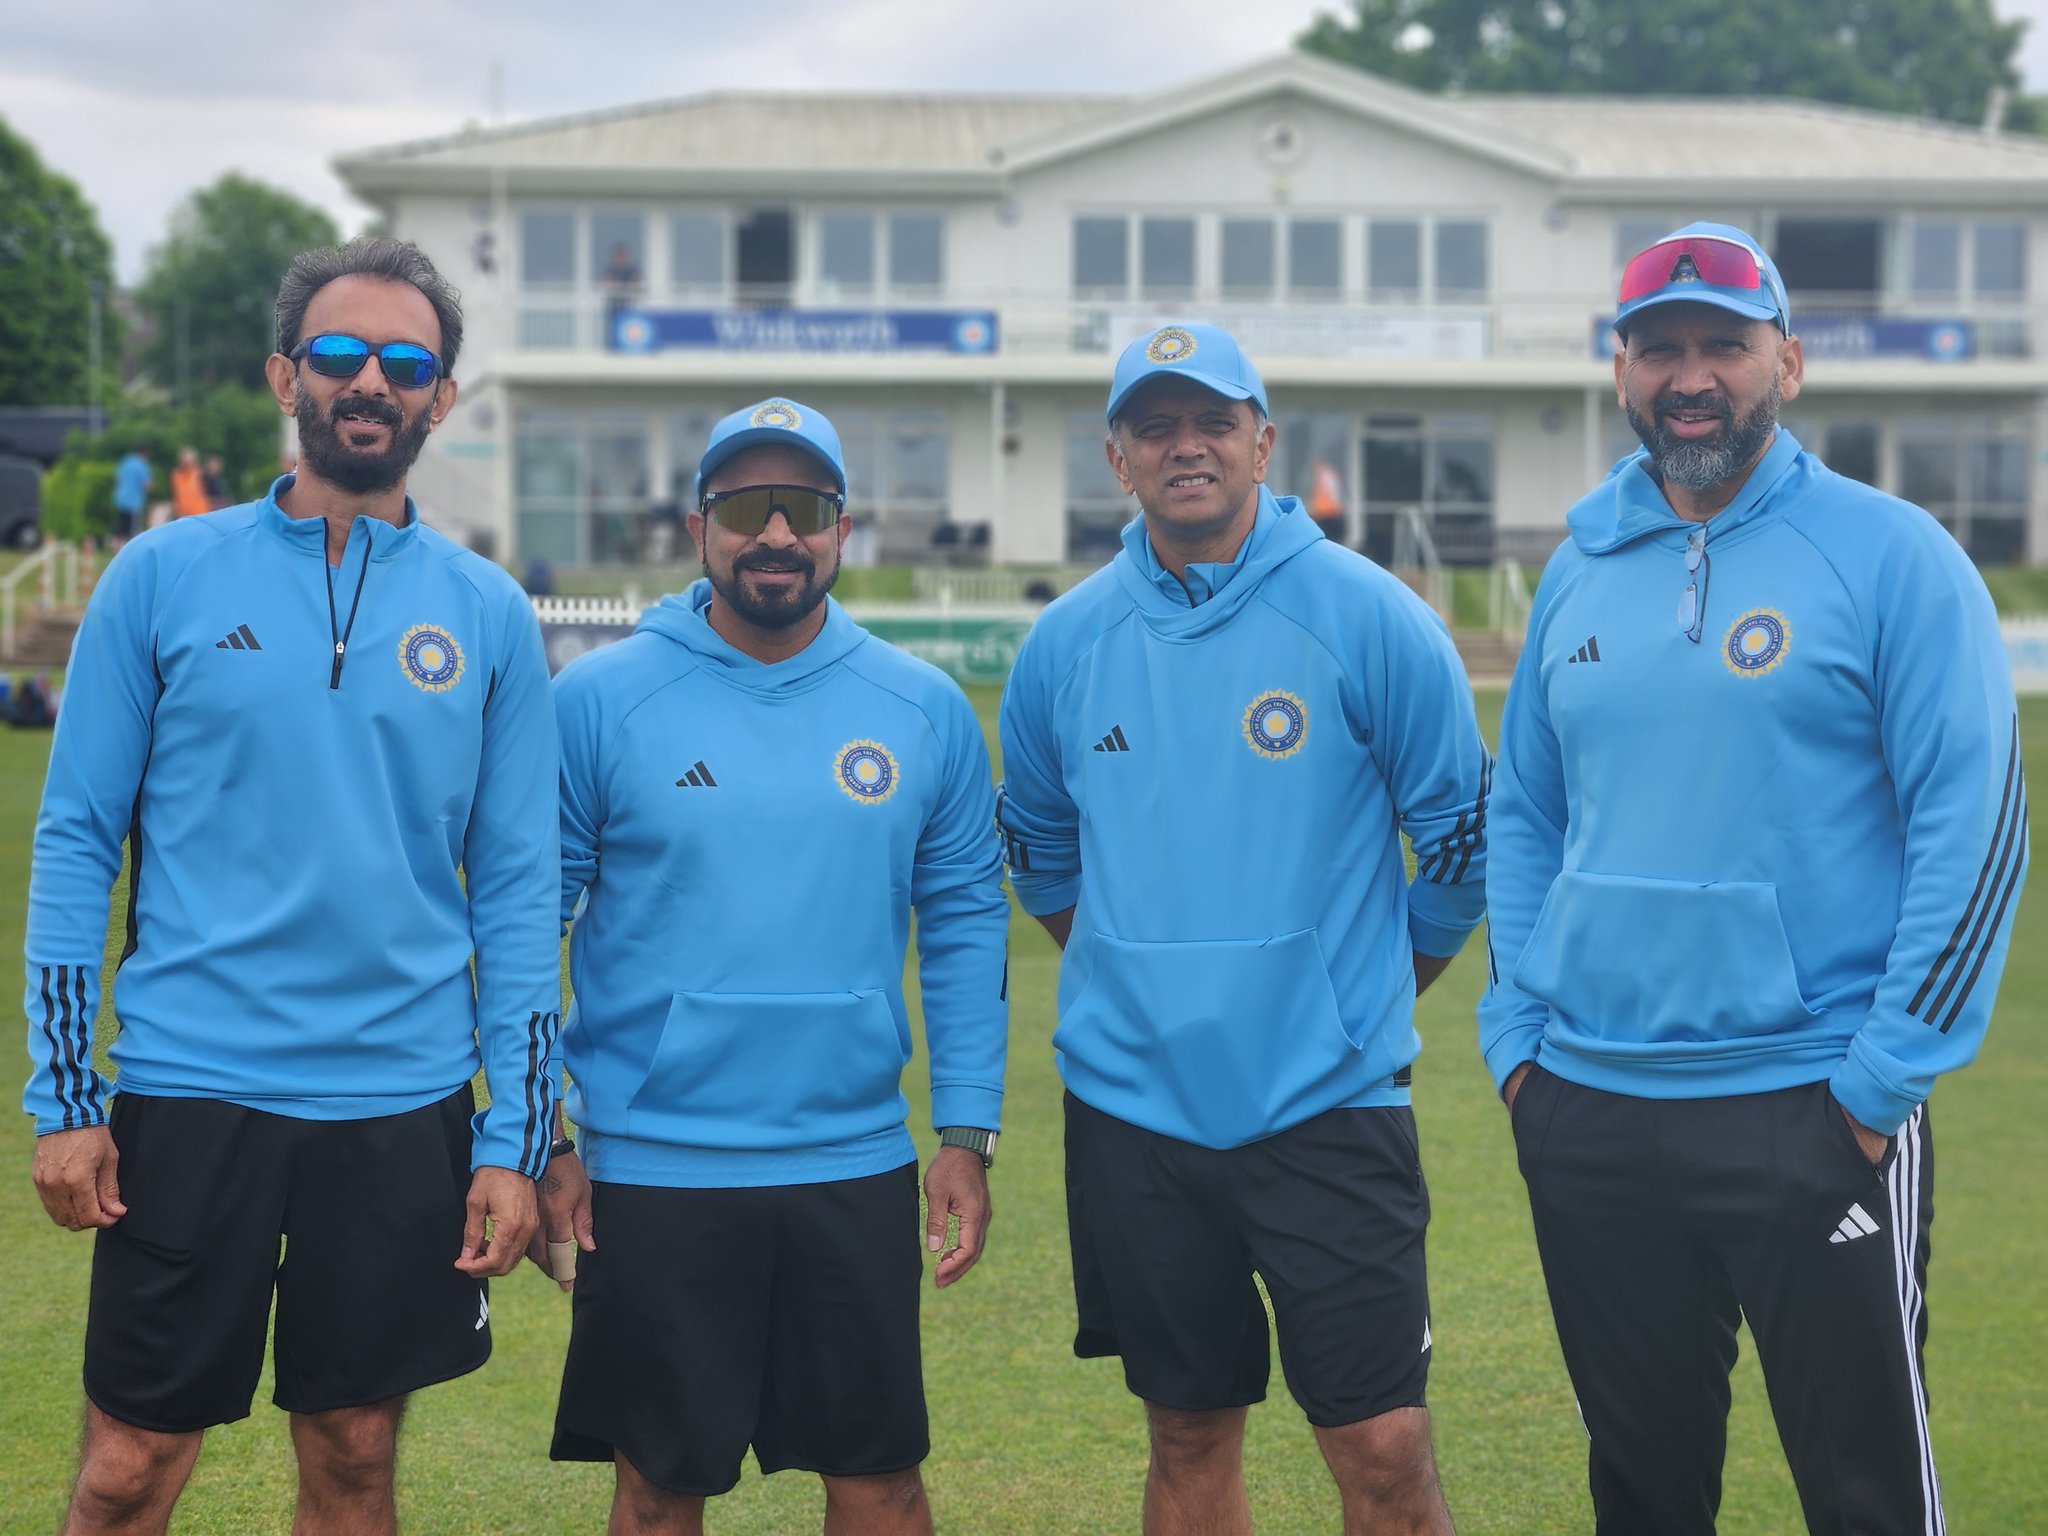 Indian Cricket Team New Jersey